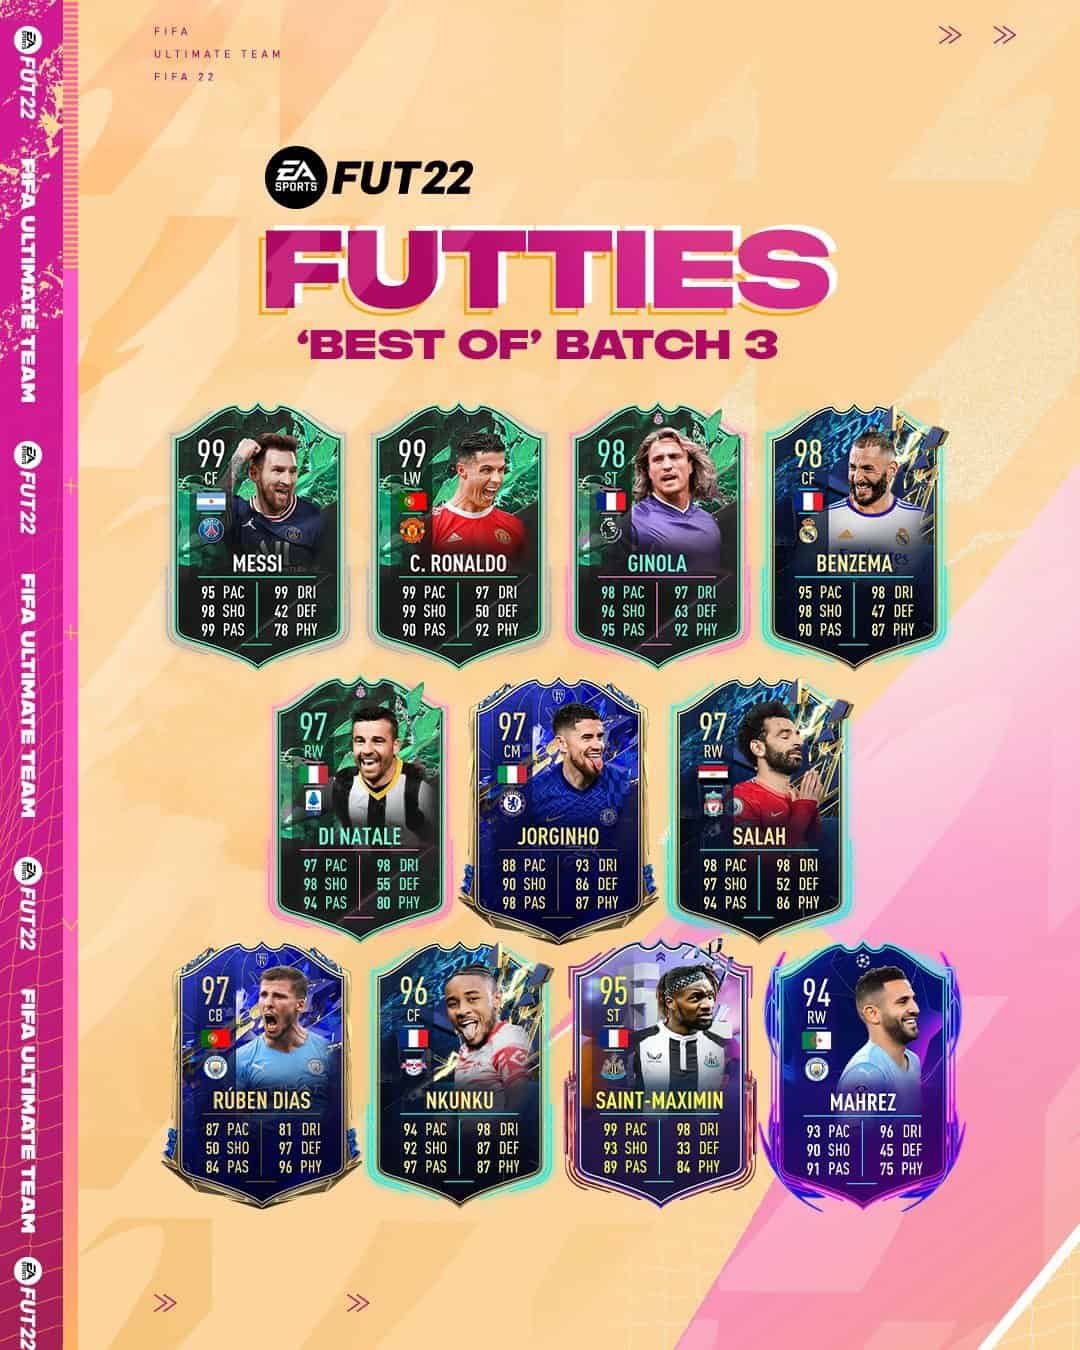 FIFA 23 May Prime Gaming Pack Expected Release Date and TOTS Rewards